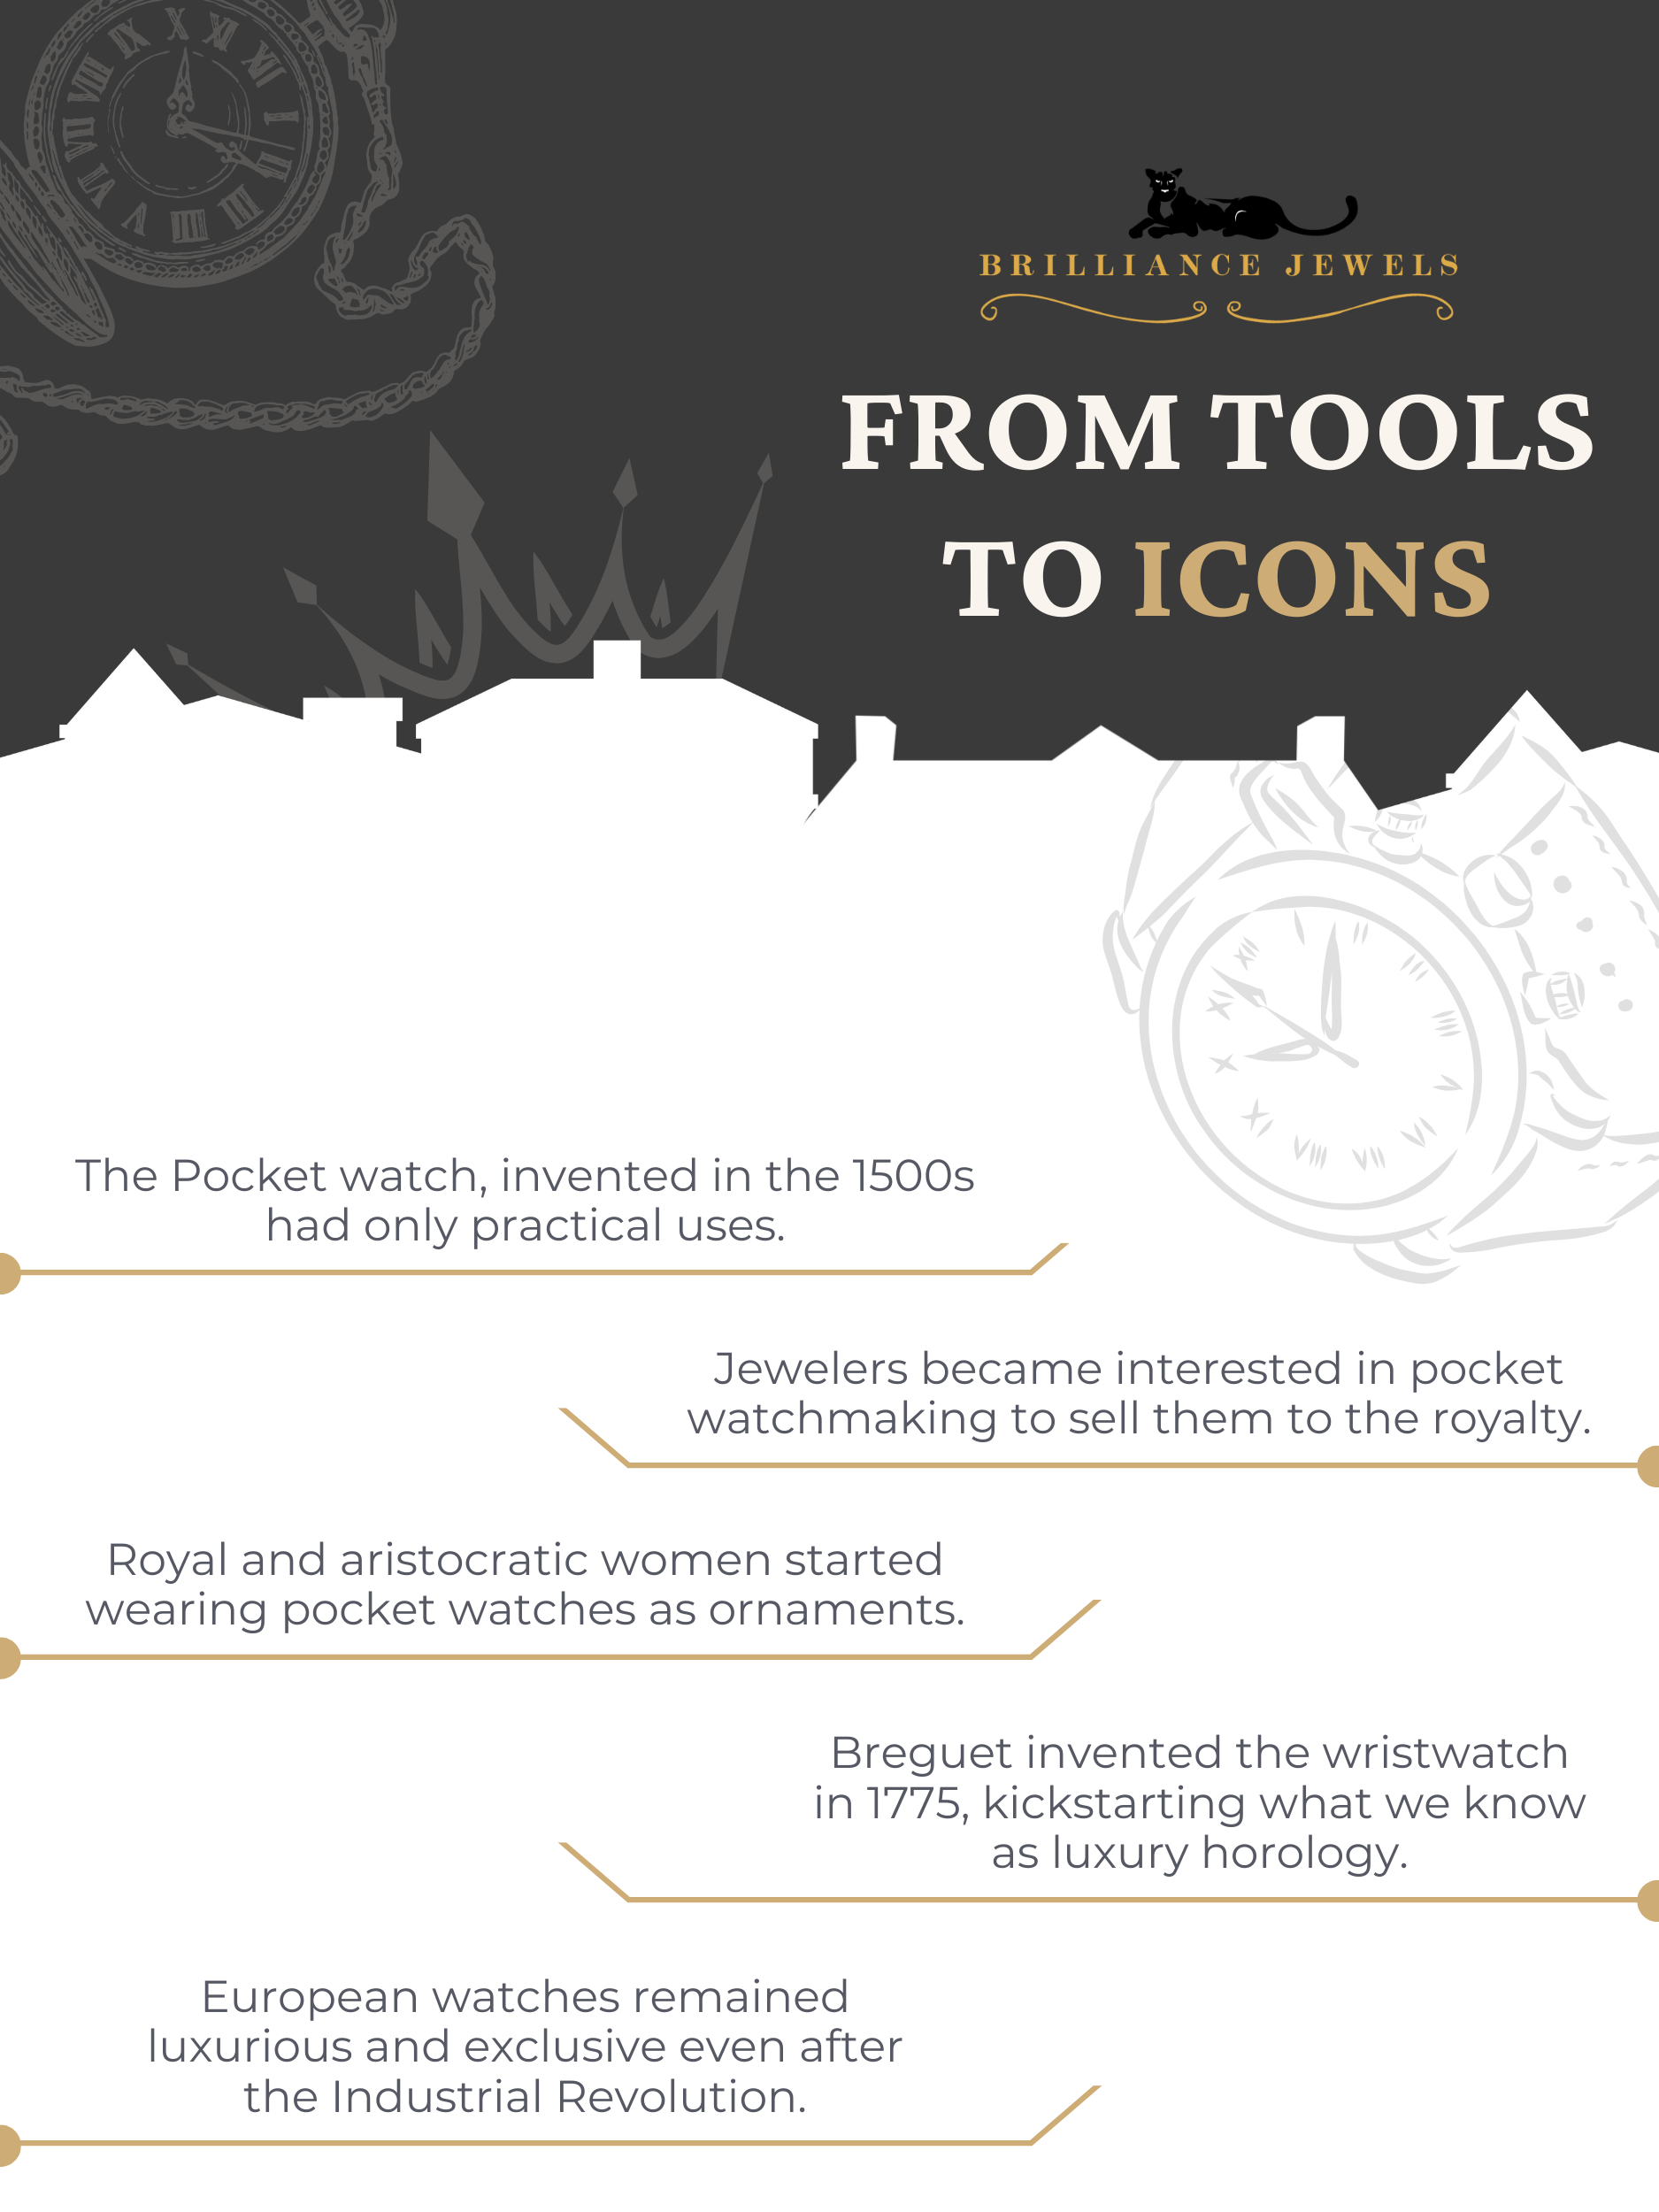 From tools to icons 2